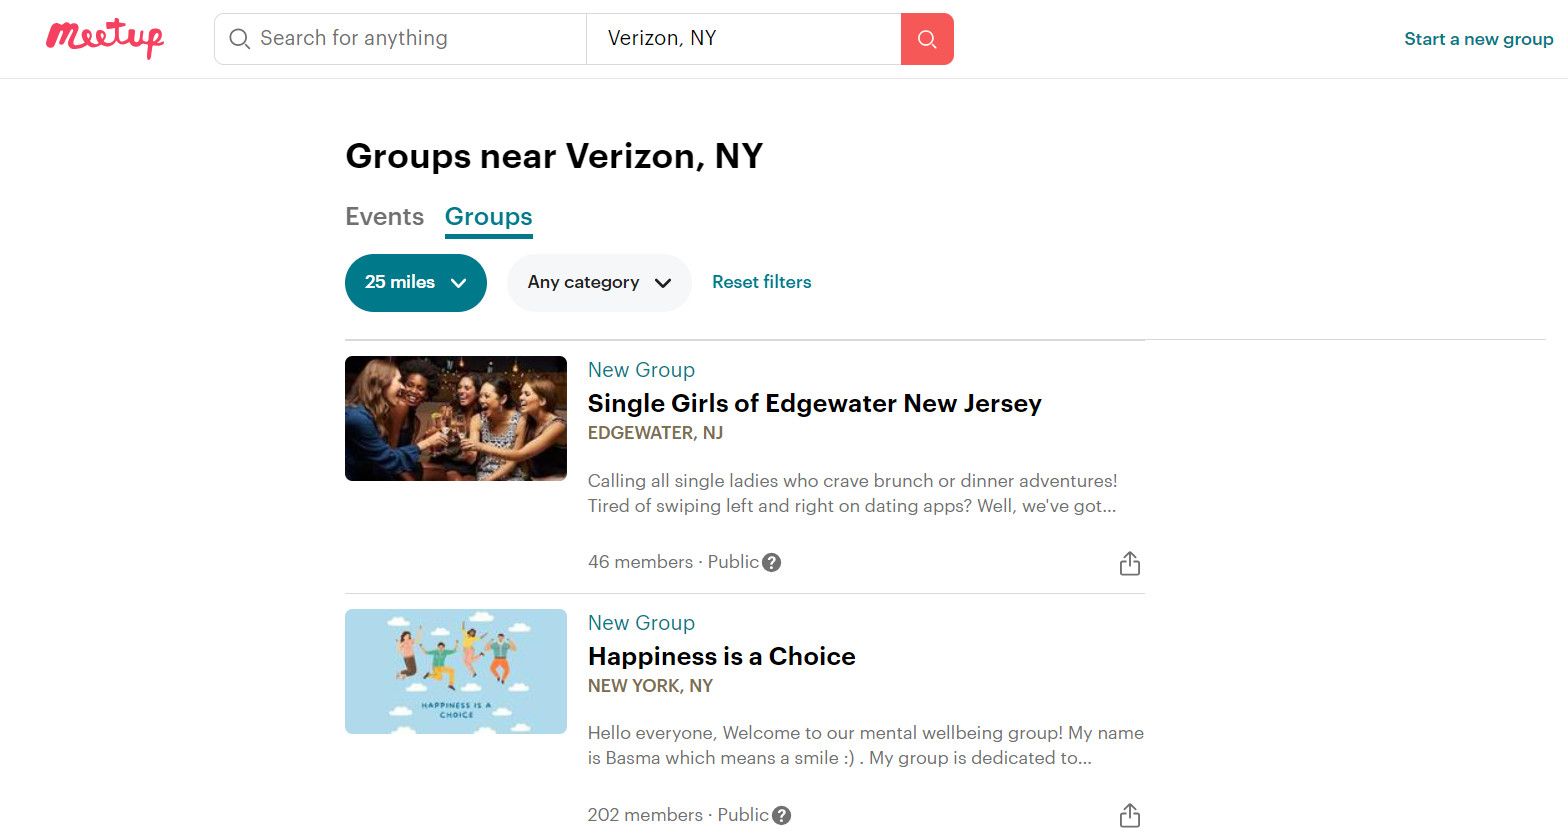 Groups on the Meetup website